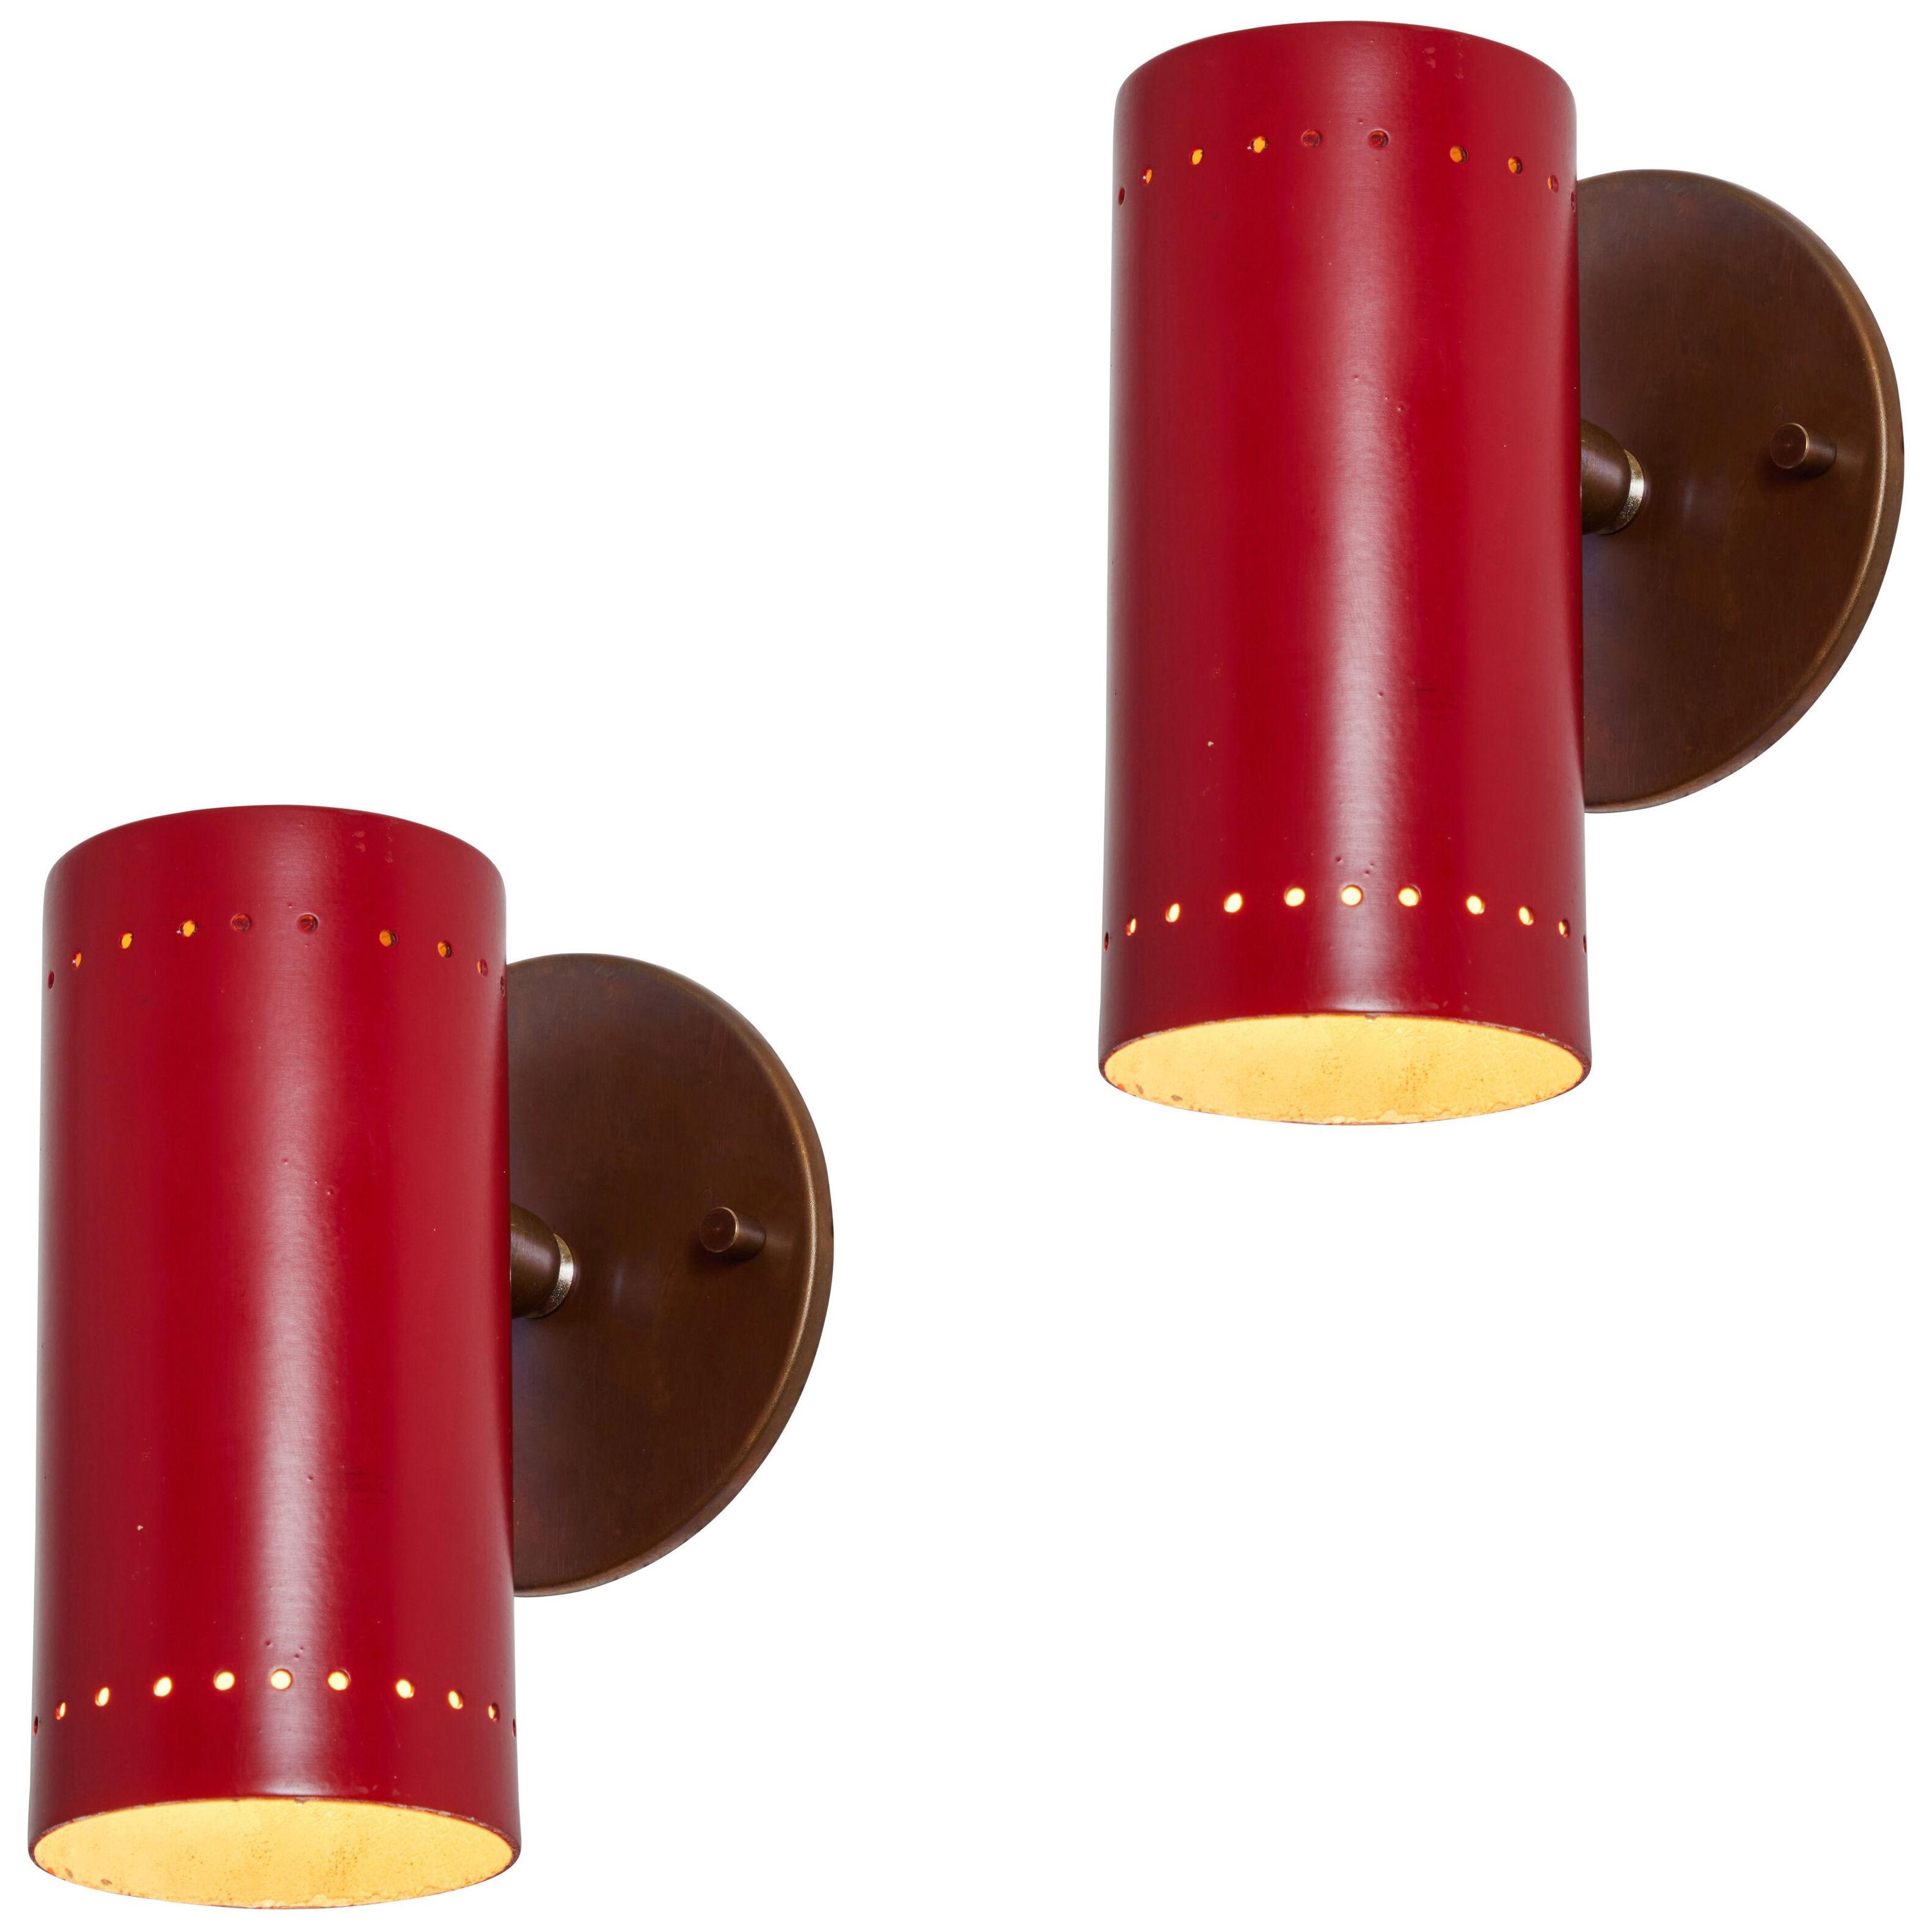 Pair of 1960s Tito Agnoli Red and Brass Articulating Sconces for O-Luce